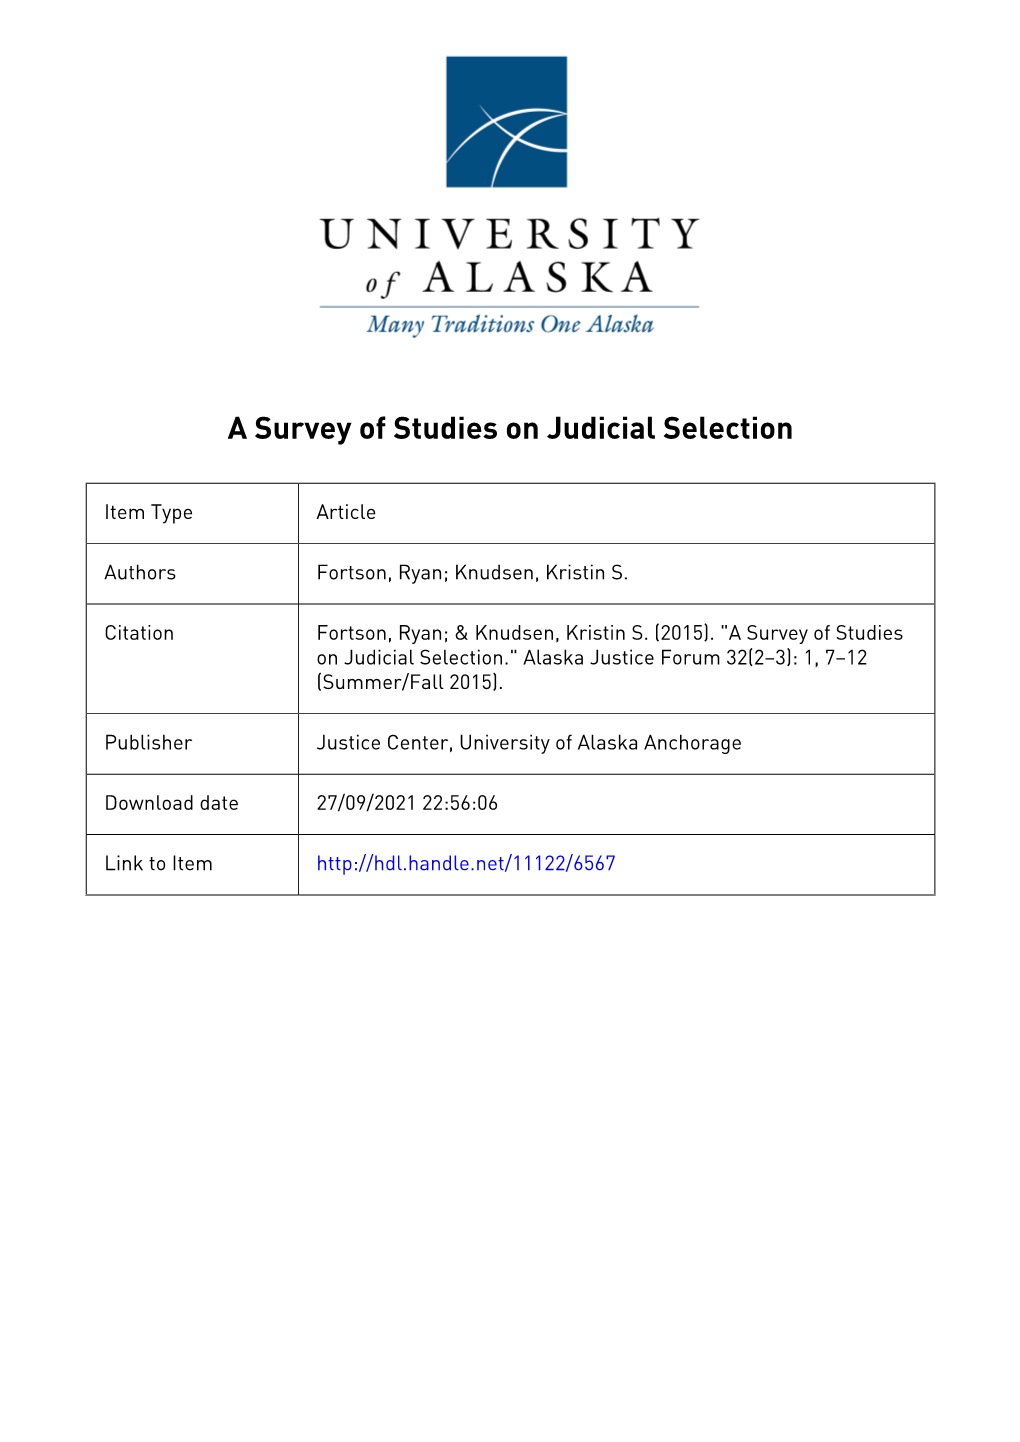 A Survey of Studies on Judicial Selection